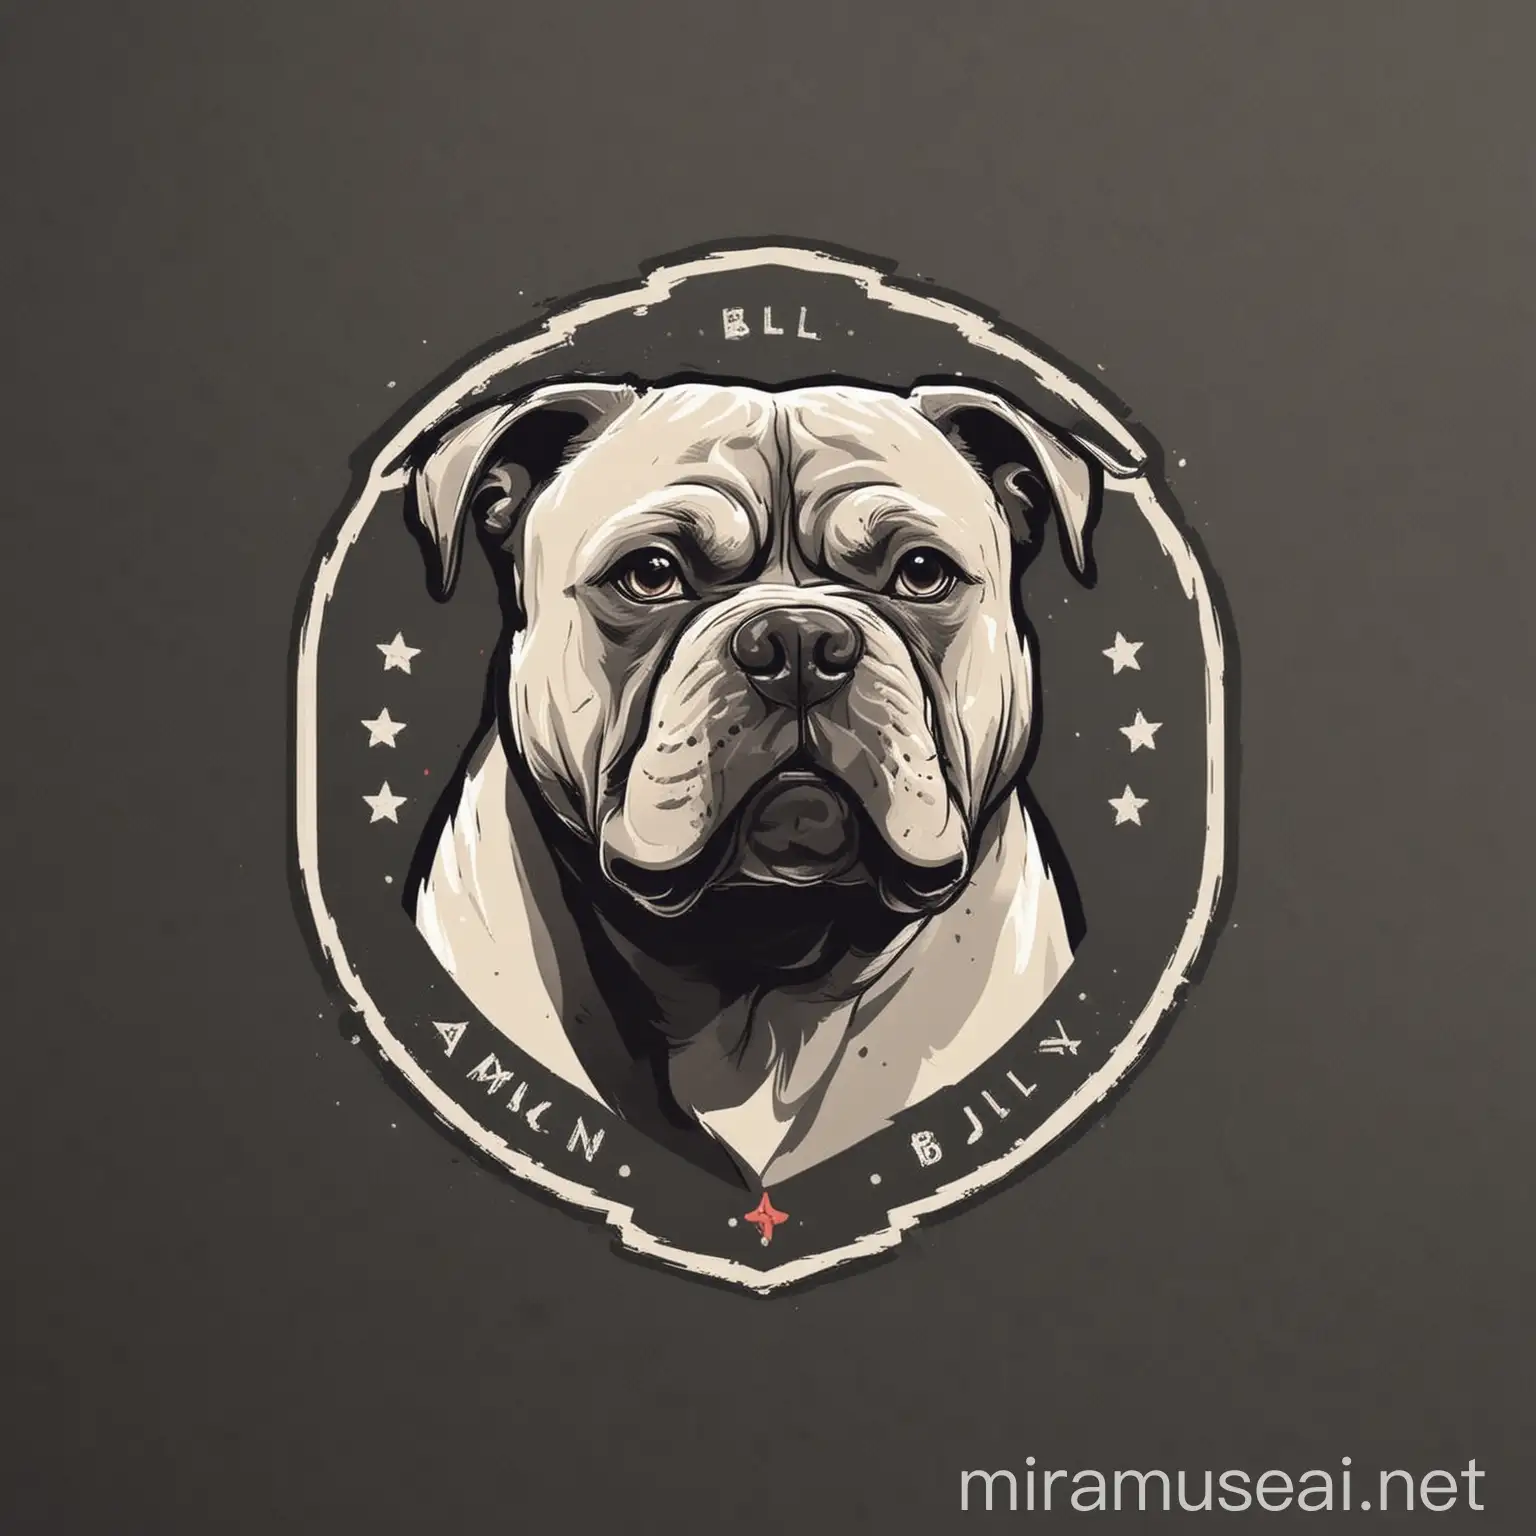 Design a minimalistic logo for an American Bully website. The logo should:

Feature a clean, modern representation of an American Bully dog.
Emphasize sleek lines and simplicity.
Use a limited, sophisticated color palette.
Convey strength and loyalty with a contemporary style.
Highlight the dog's muscular build and distinctive features in a subtle, uncluttered manner.
Be versatile and easily recognizable for various web applications.
